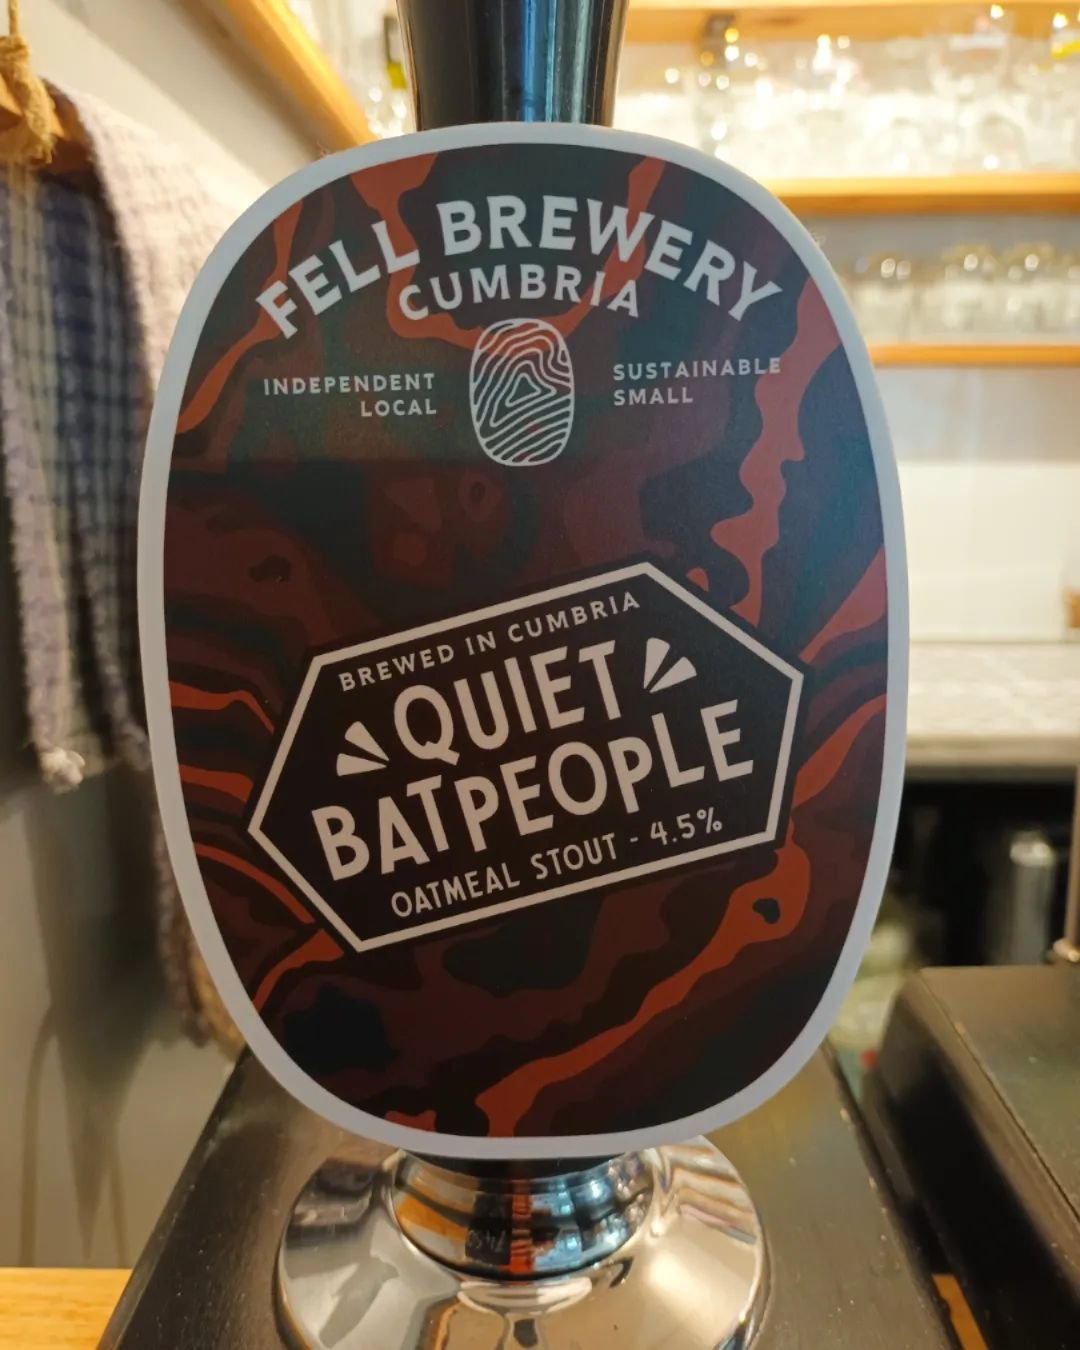 Some absolute belters starring in the line up this week...

On cask...
Fell, Quiet Batpeople, 4.5% - A luxurious oatmeal stout with huge notes of dark chocolate and a hefty roasty bitter finish

Hawkshead, Lakeland Gold, 4.4% - A refreshing and well 